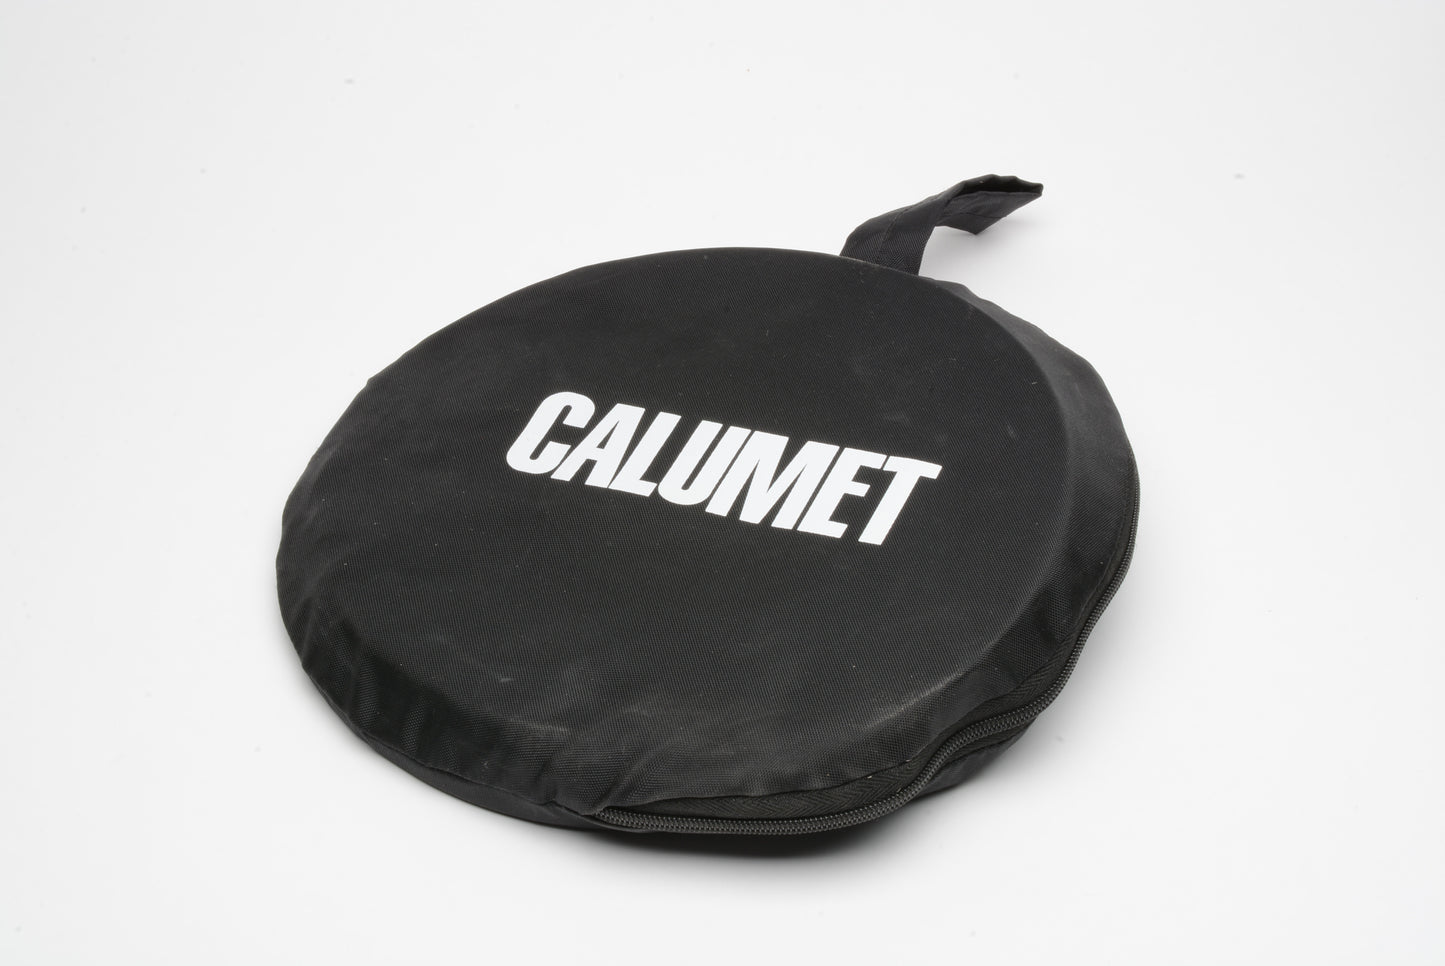 Calumet 5 in 1 32" collapsible reflector kit